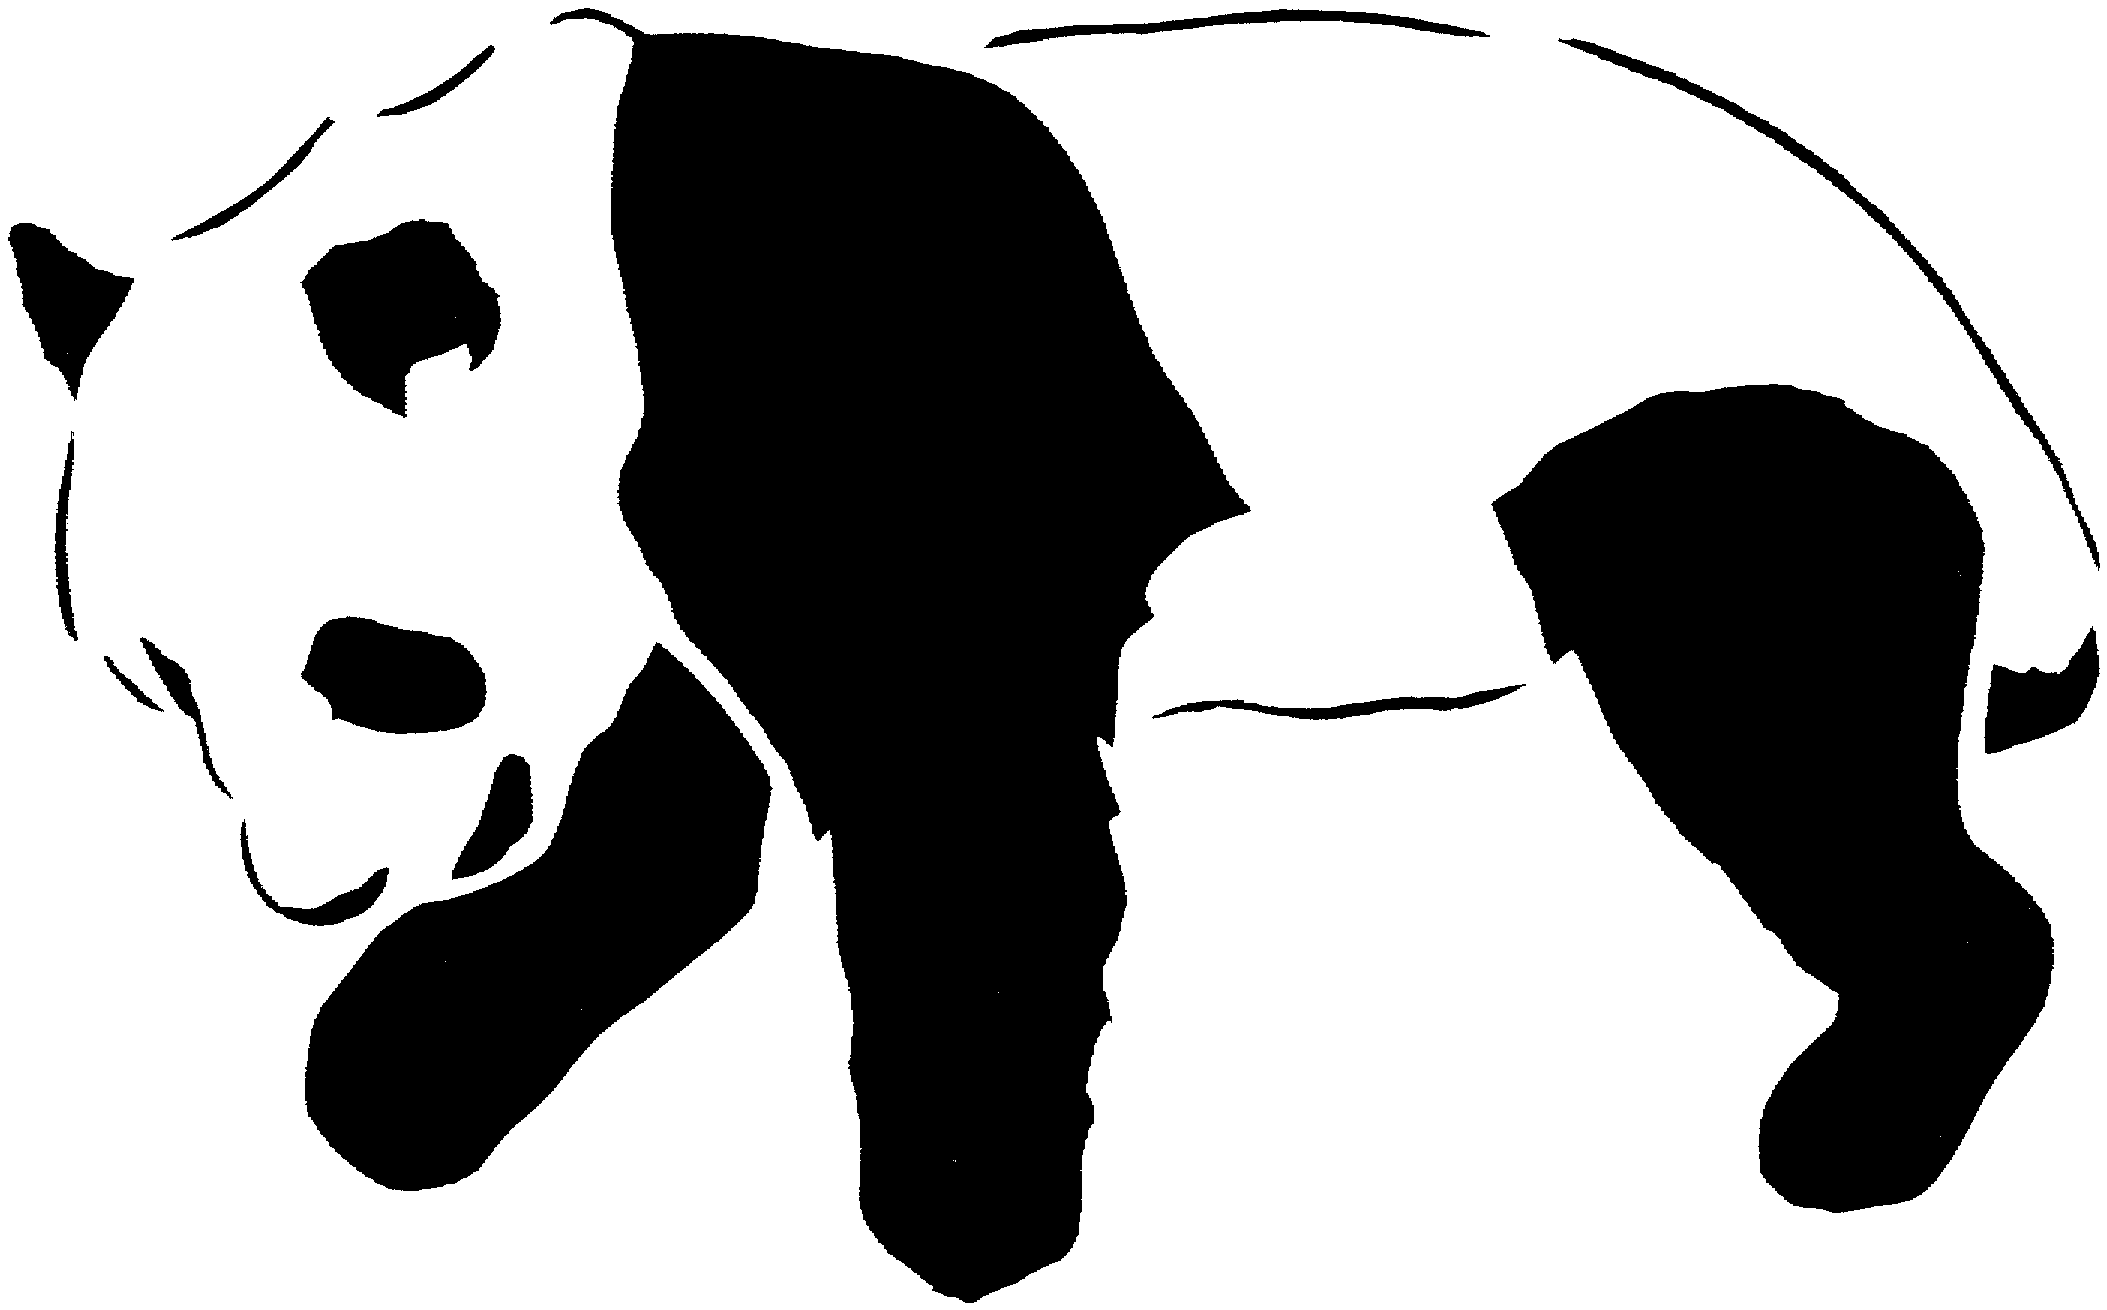 Cute Black And White Panda Colouring Sheet - ClipArt Best